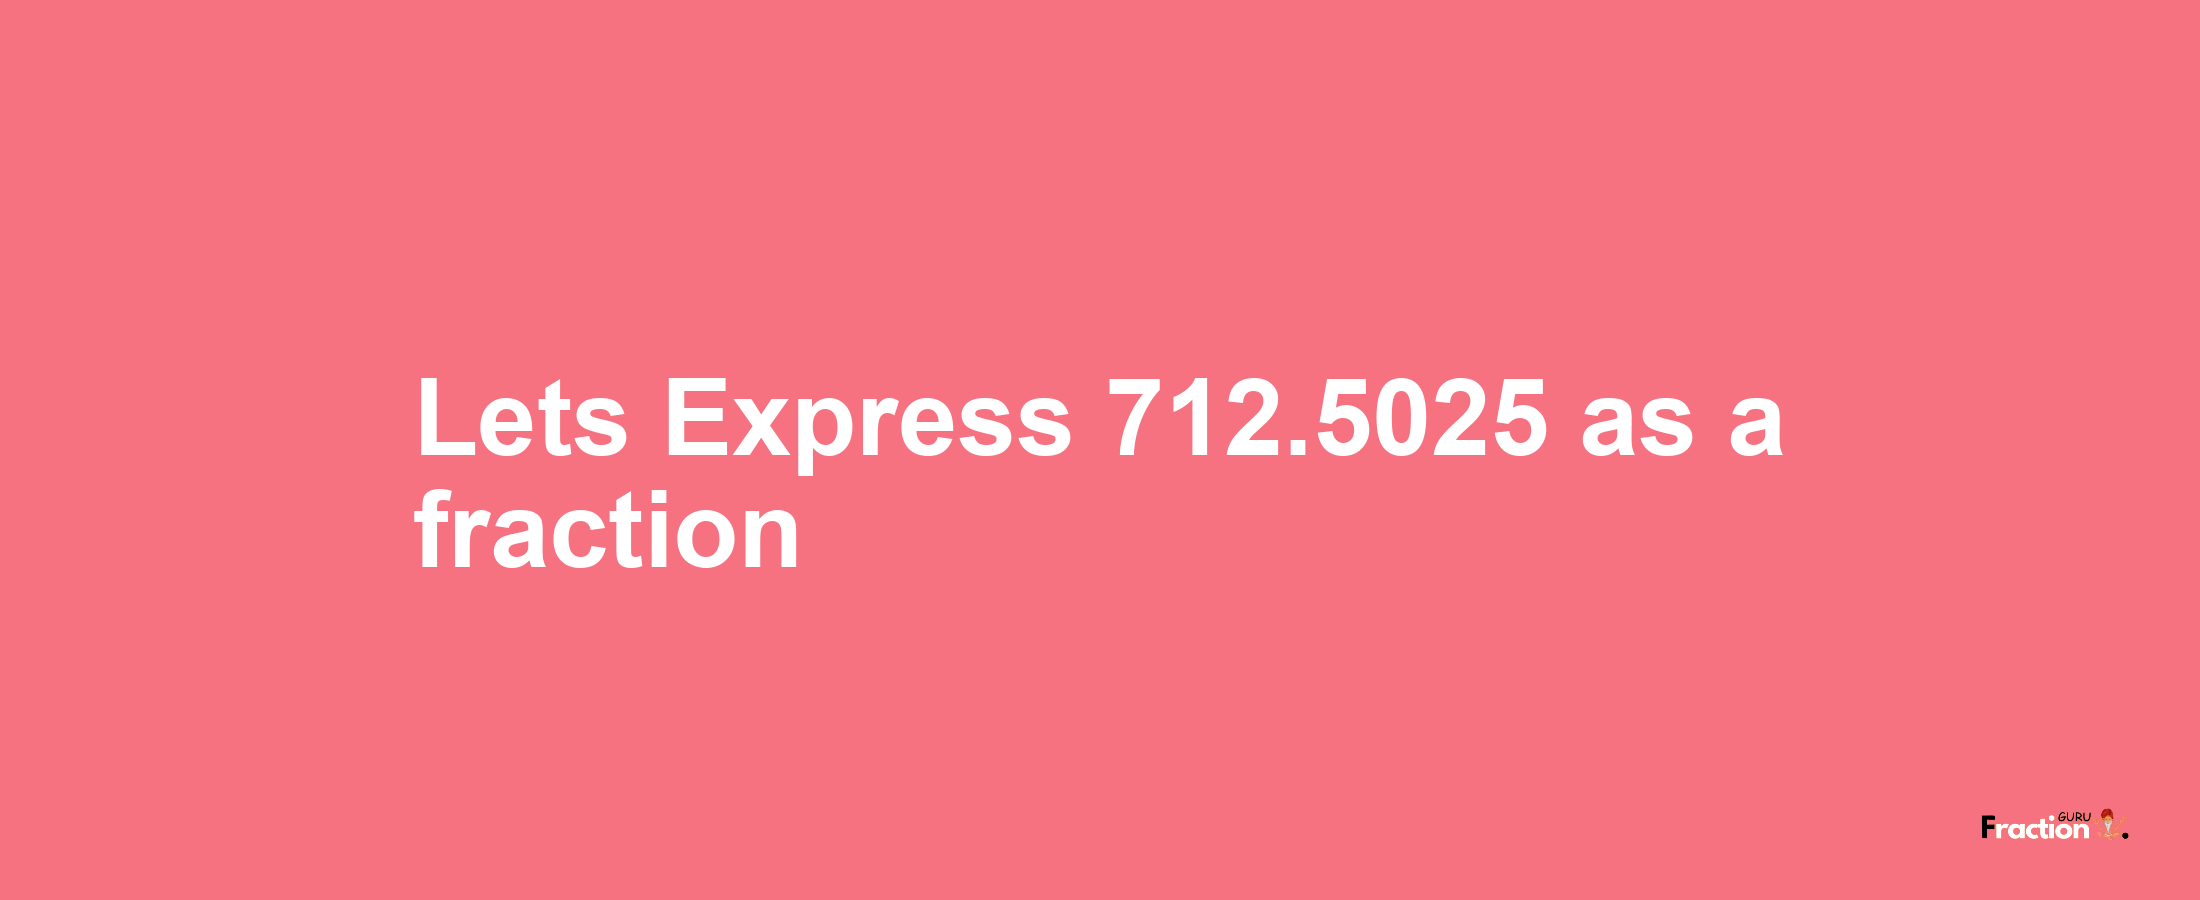 Lets Express 712.5025 as afraction